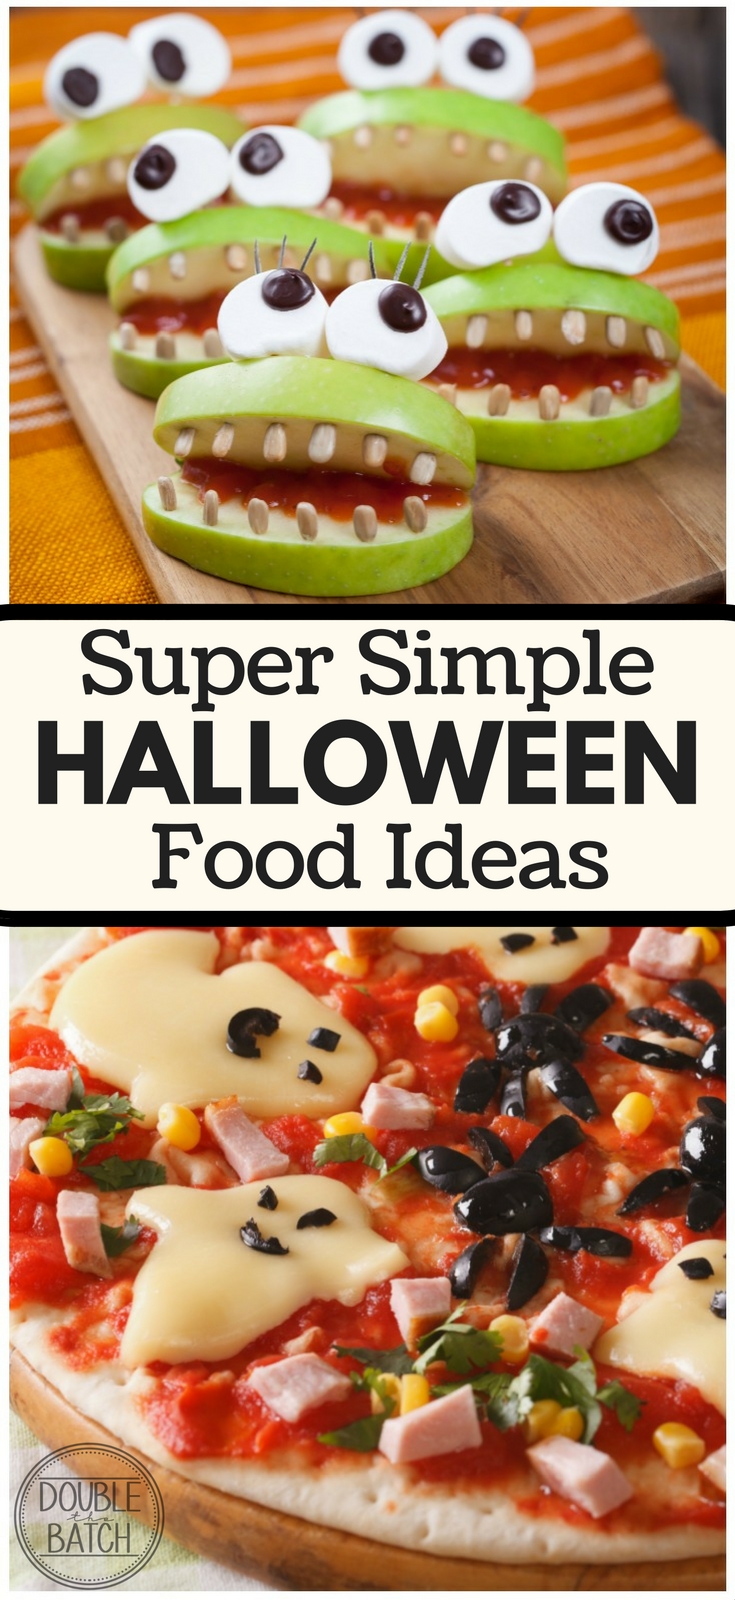 Loving these simple Halloween food ideas! Sanity saved, bellies filled, happy memories made!